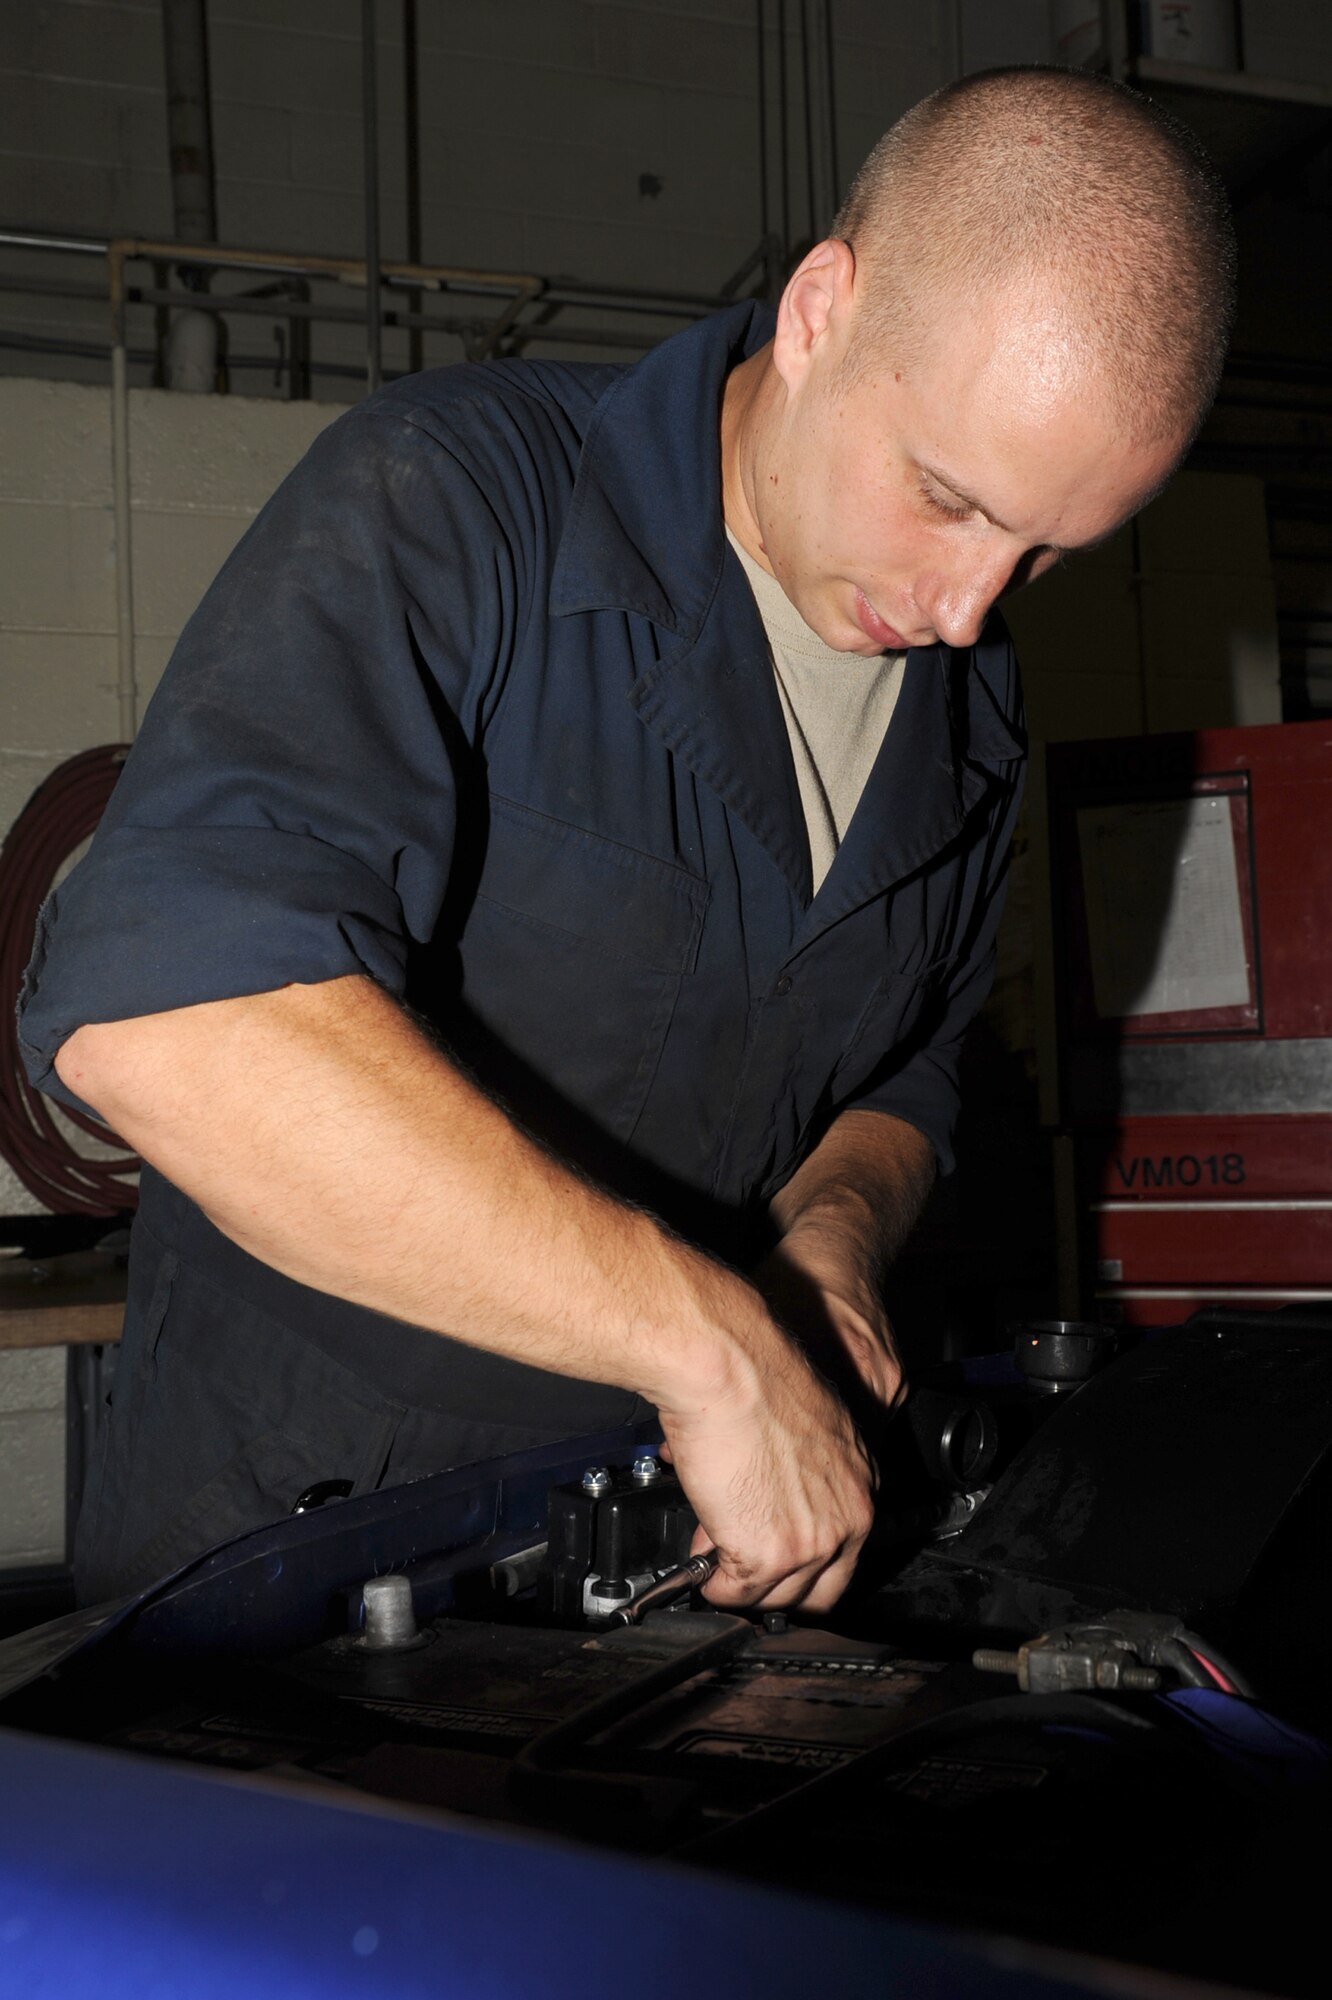 Senior Airman Brian Ball tightens a bolt on a shroud during maintenance repair at Seymour Johnson Air Force Base, N.C., Sept. 27, 2011. A shroud helps direct air through a radiator so it cools. Ball is a 4th Logistics Readiness Squadron vehicle mechanic technician and a native of Carning, N.Y.  (U.S. Air Force photo by Senior Airman Whitney Stanfield)